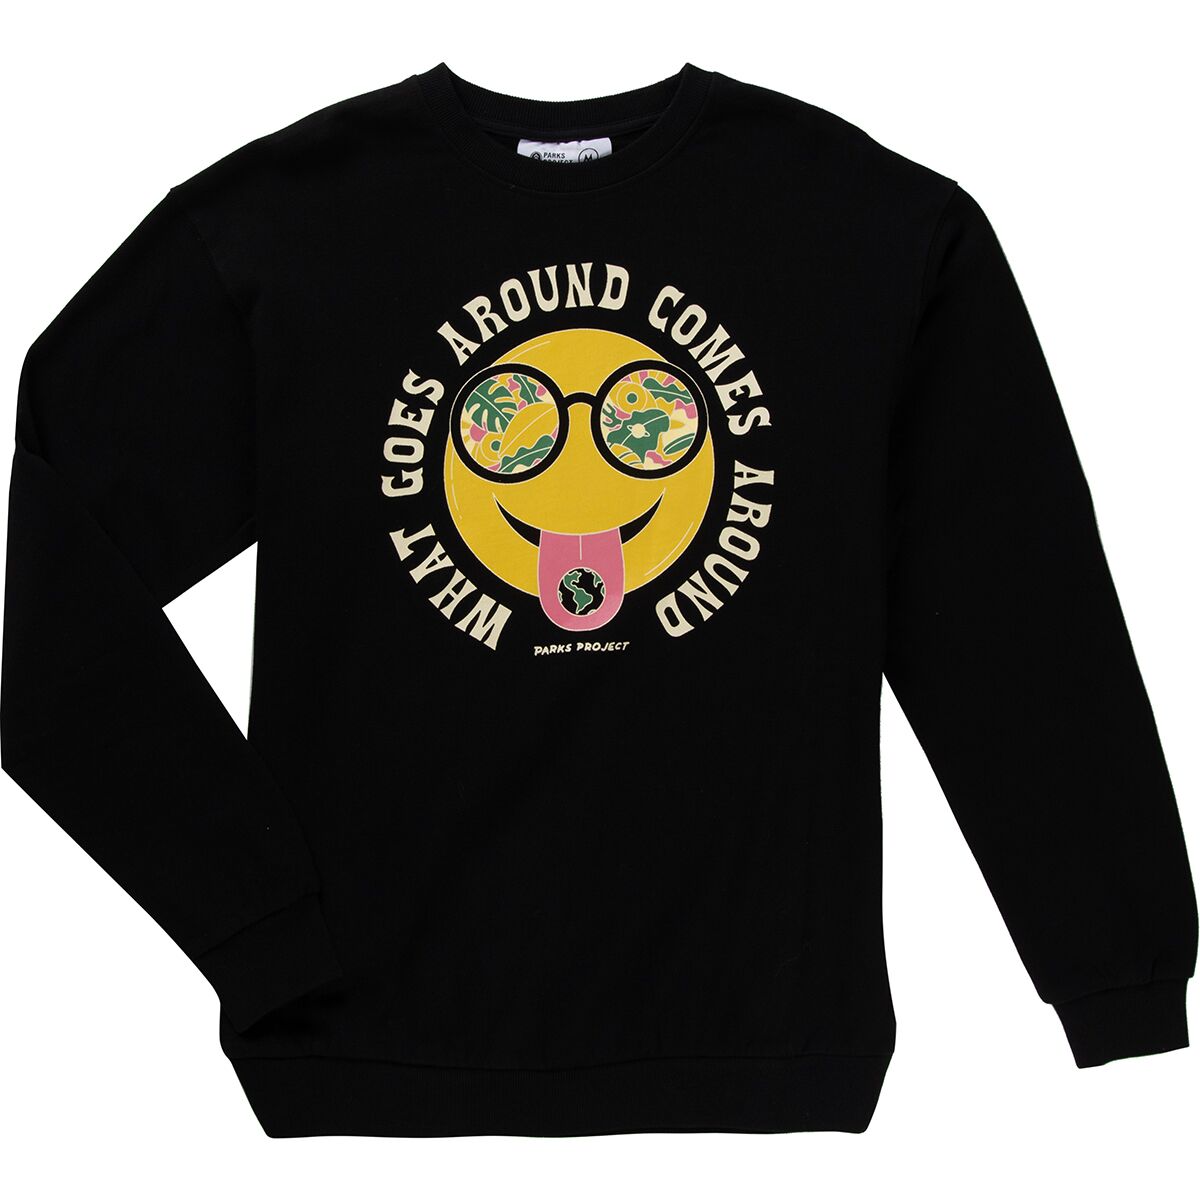 What Goes Around Comes Around Organic Sweatshirt Parks Project